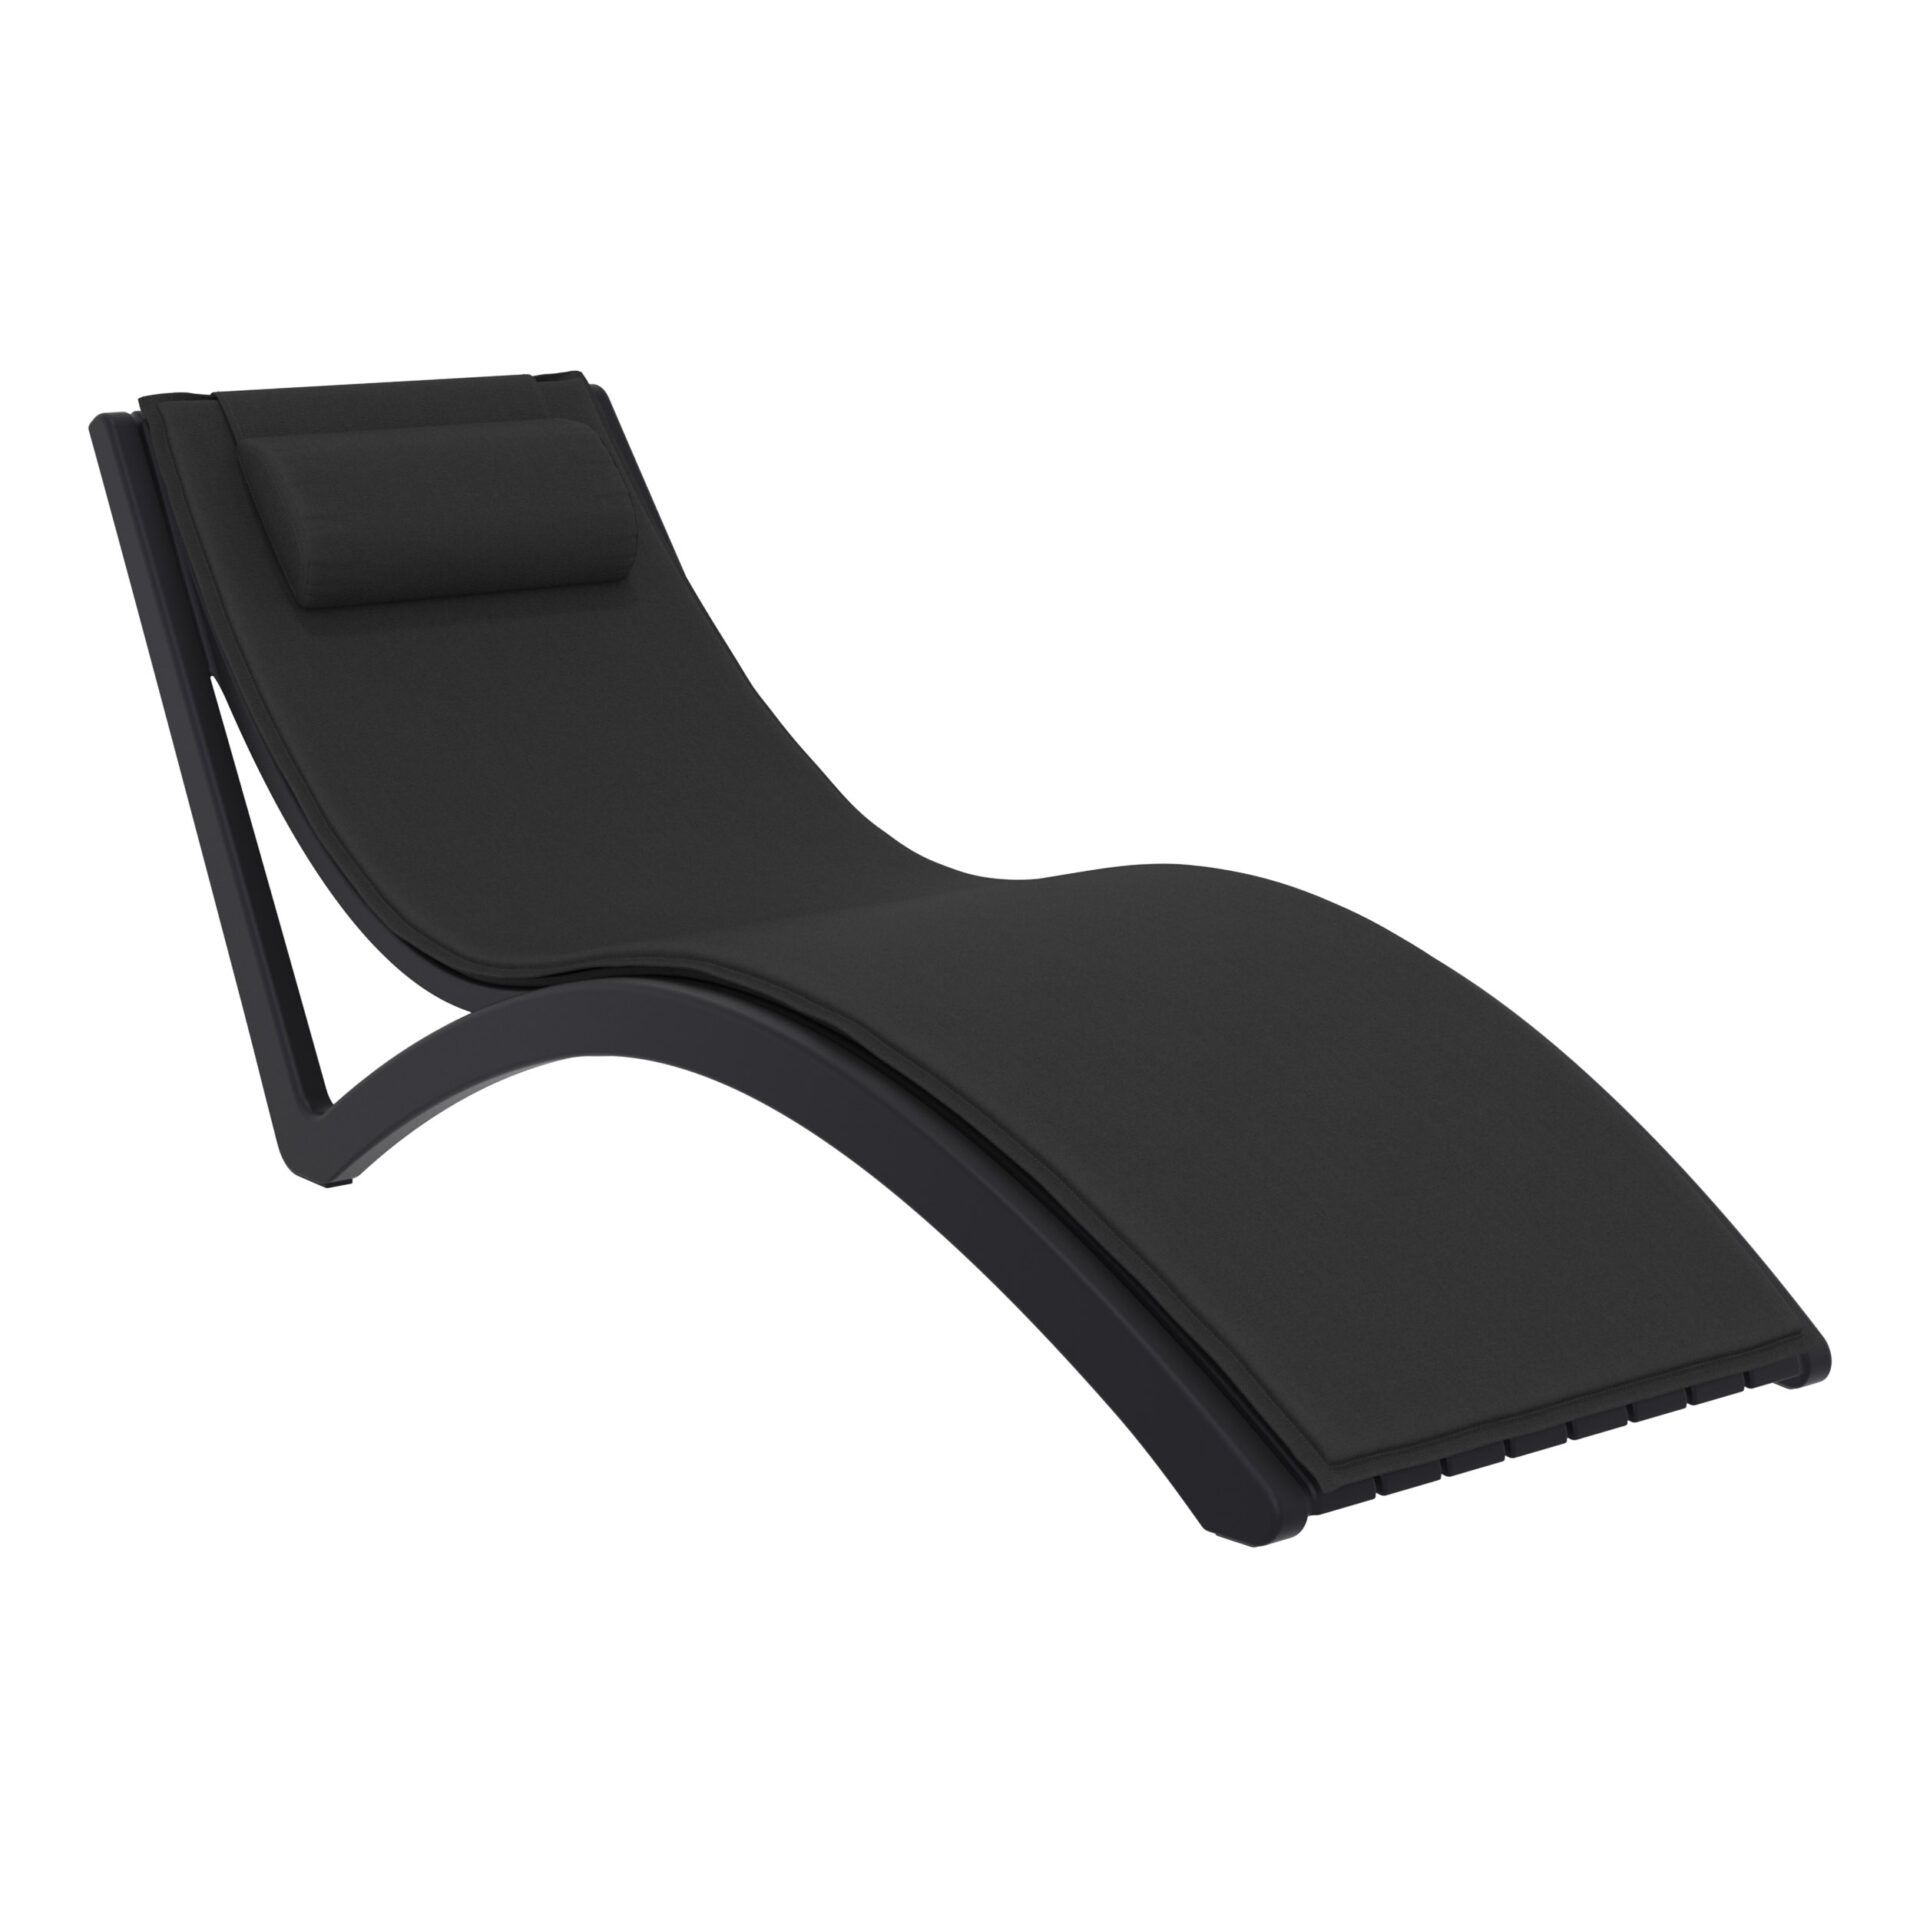 Slim Sunlounger - Black with Black Cushion and Pillow